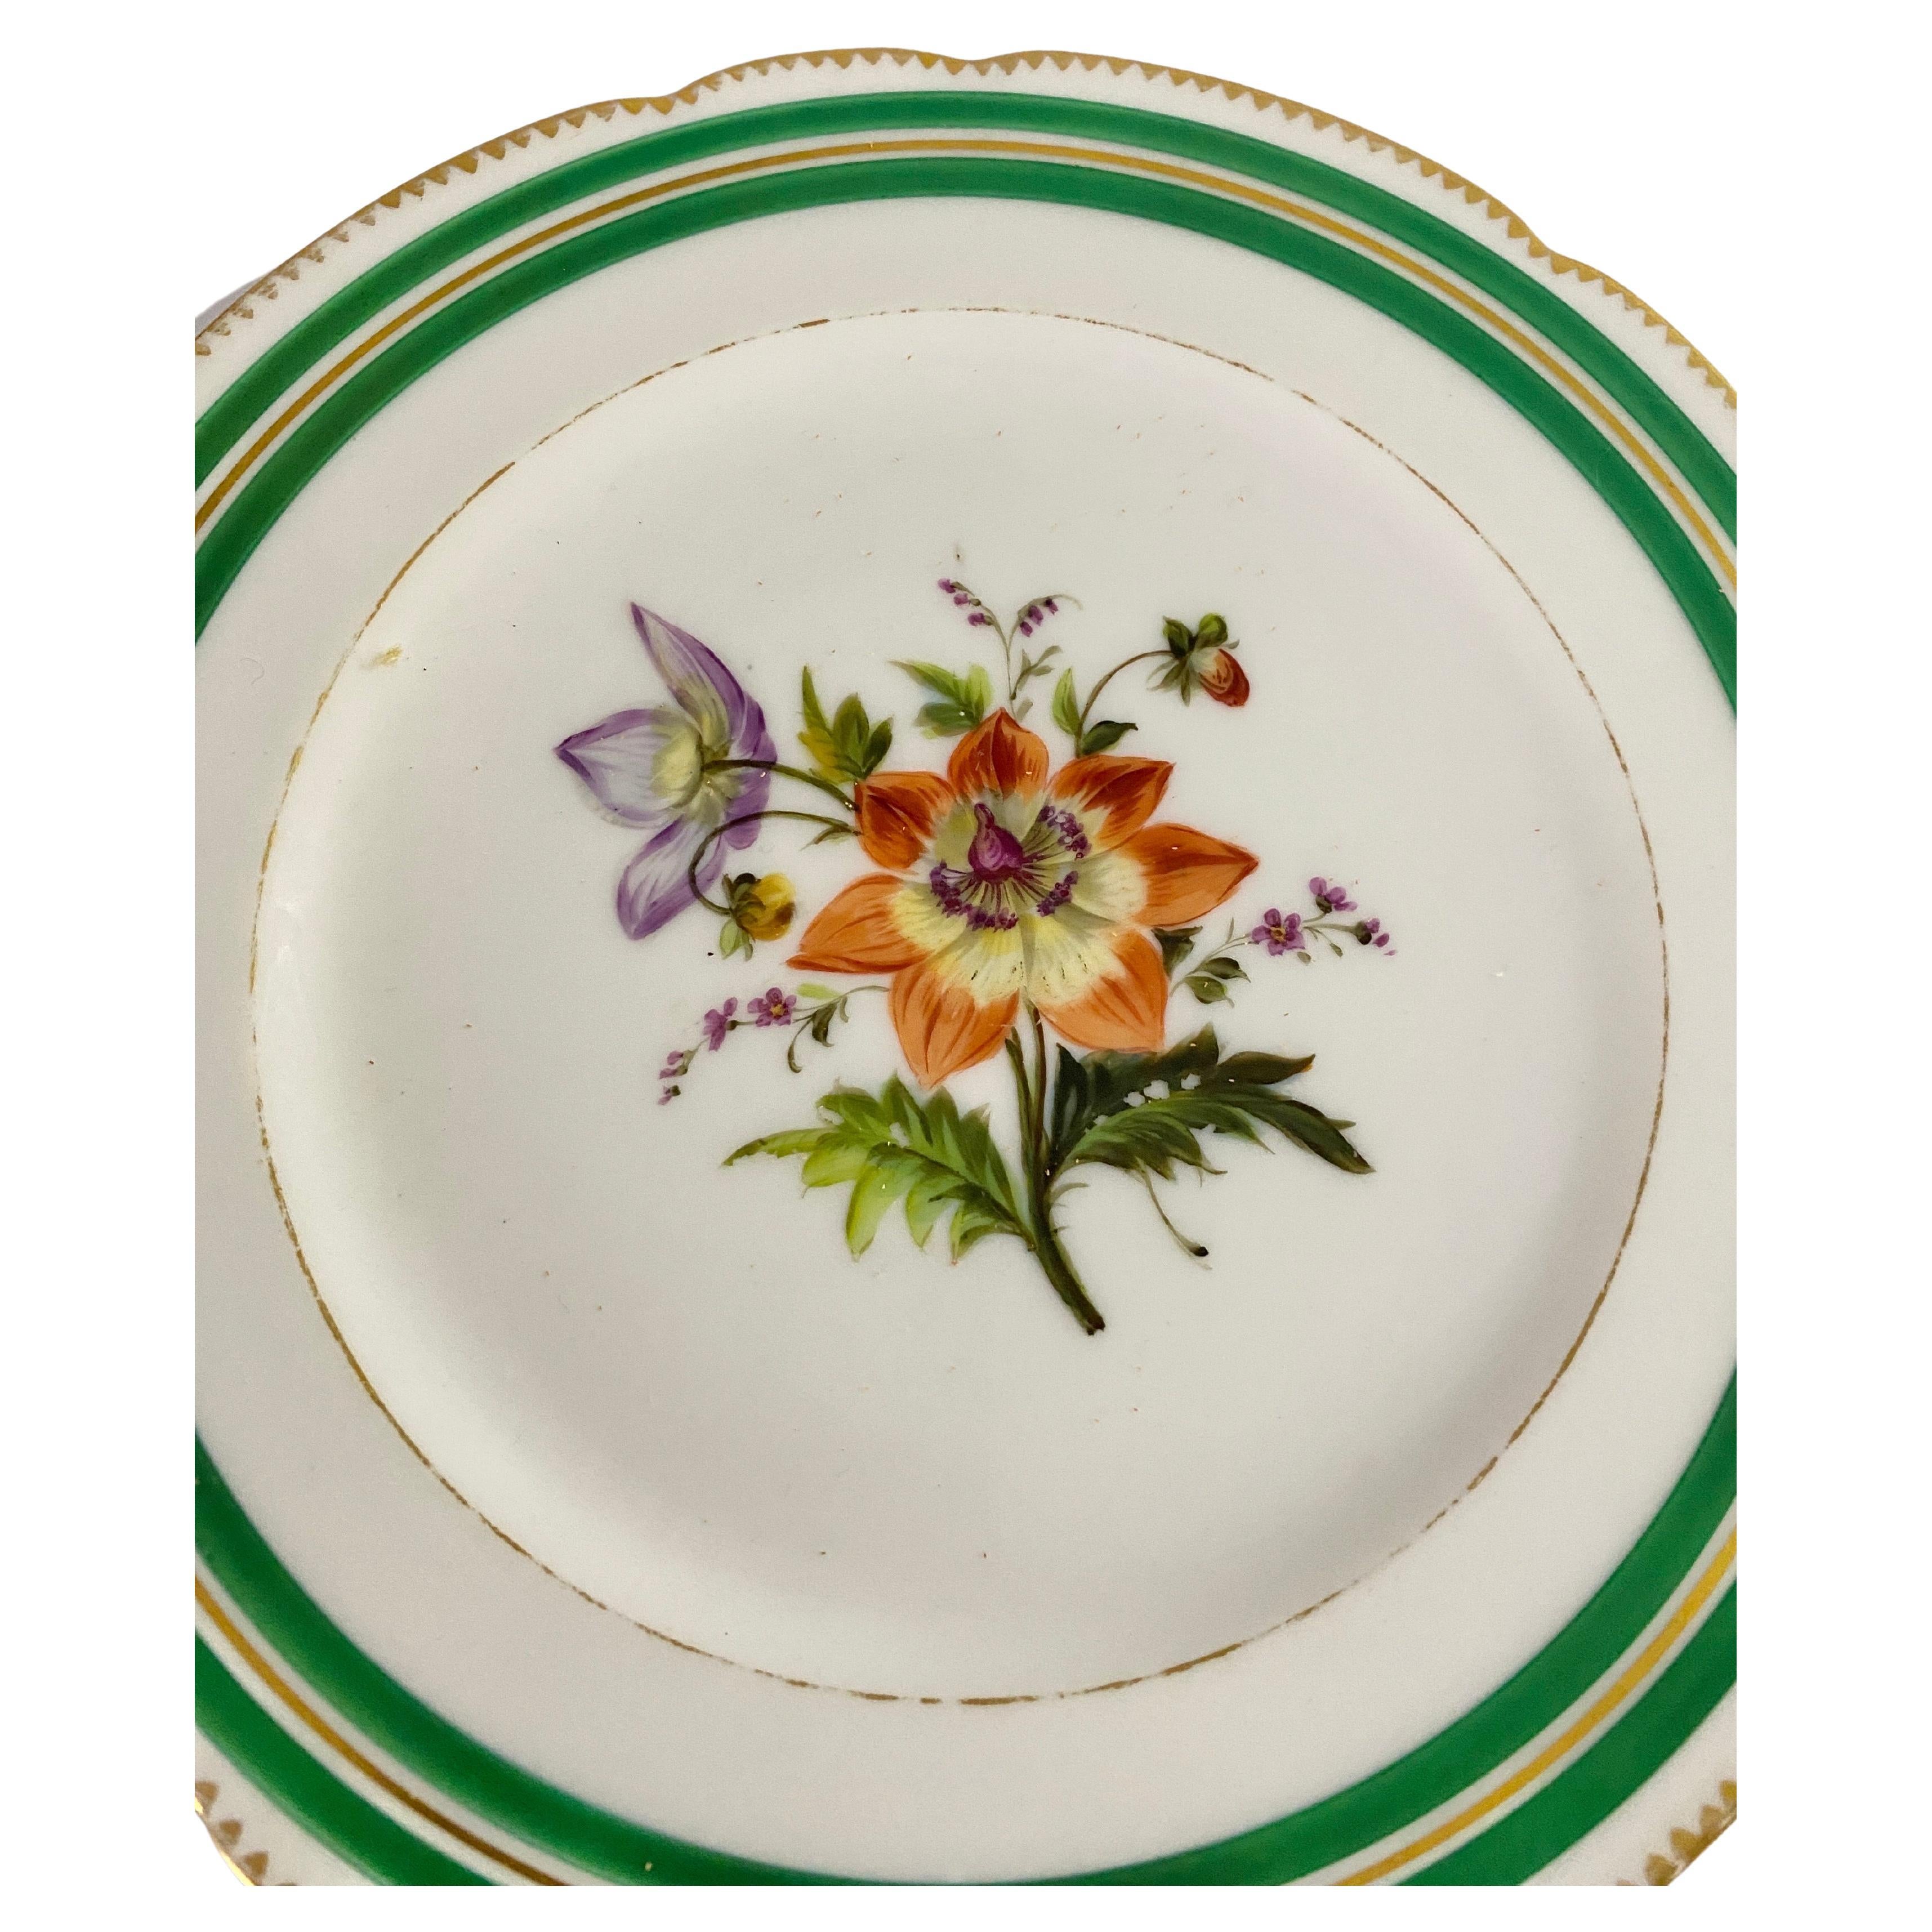 Paris porcelain plate Circa 1830. It is painted with a large spray of flowers, between gilt lines. The comor are green and gilt. It has been made in France.